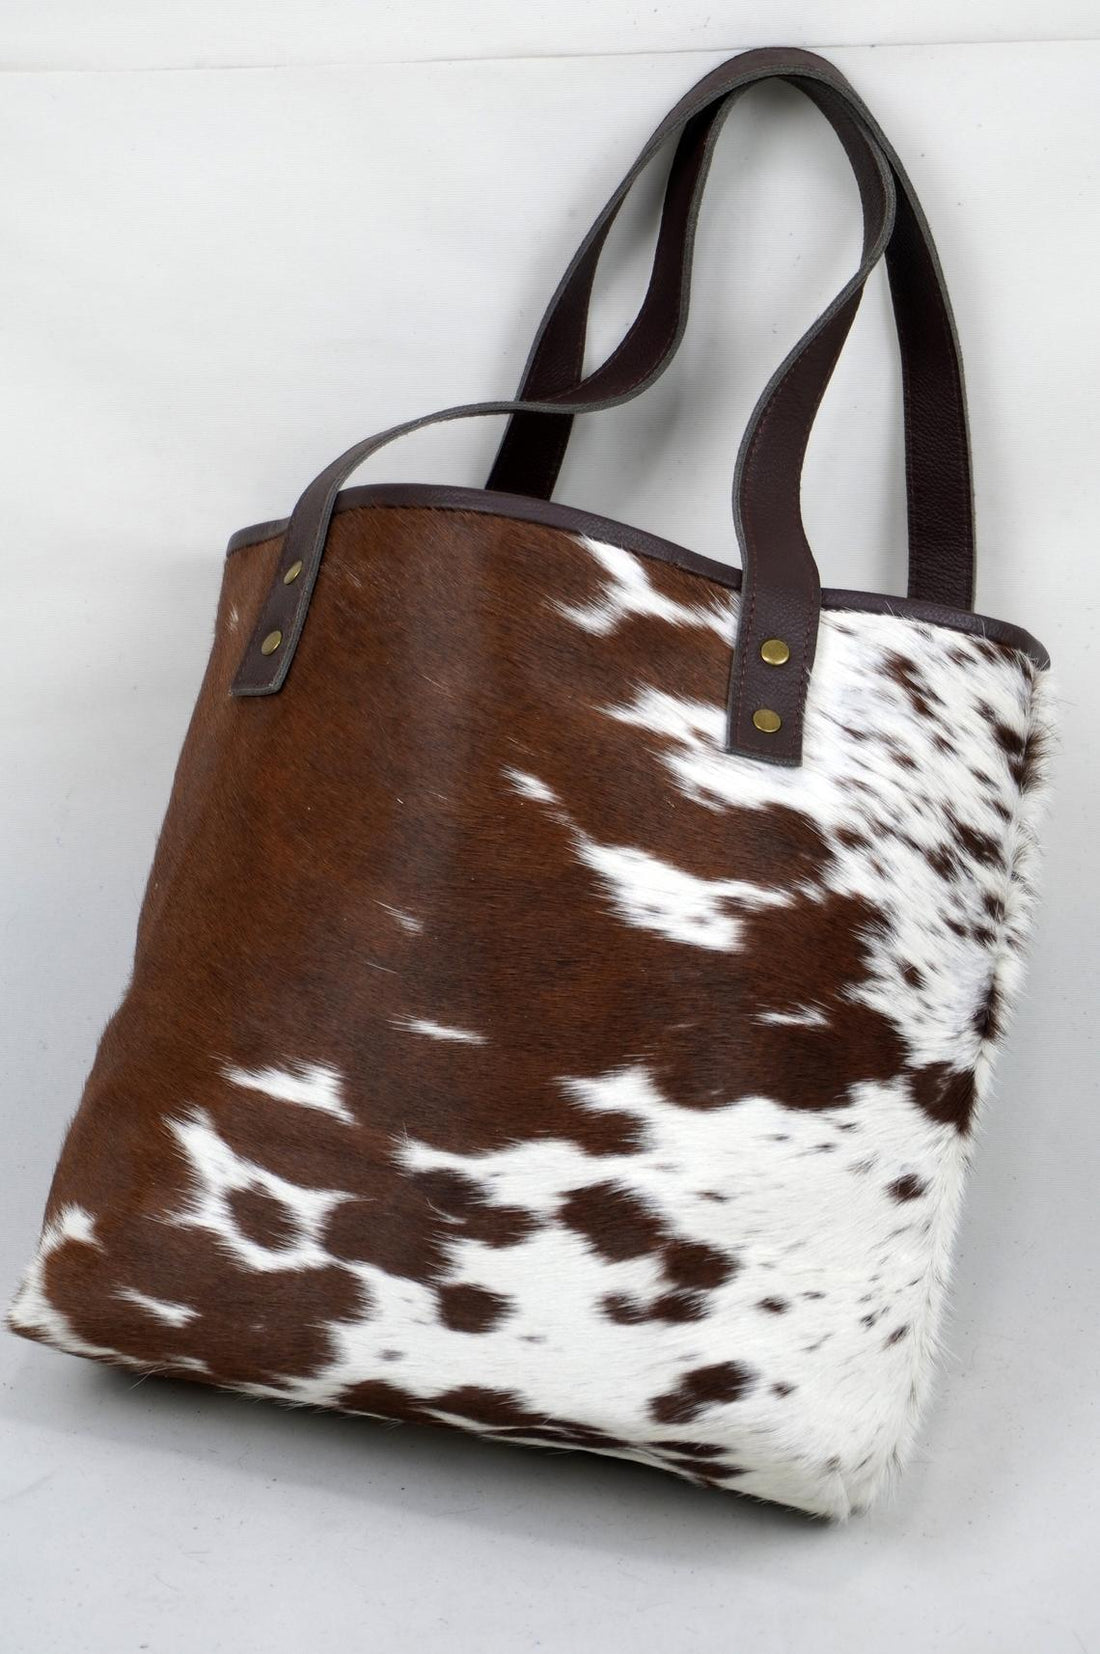 Double Sided Natural Cowhide Tote Bags | Double Sided Hair On Leather Cow Hide Handbags | Shoulder Bags (DTB118)